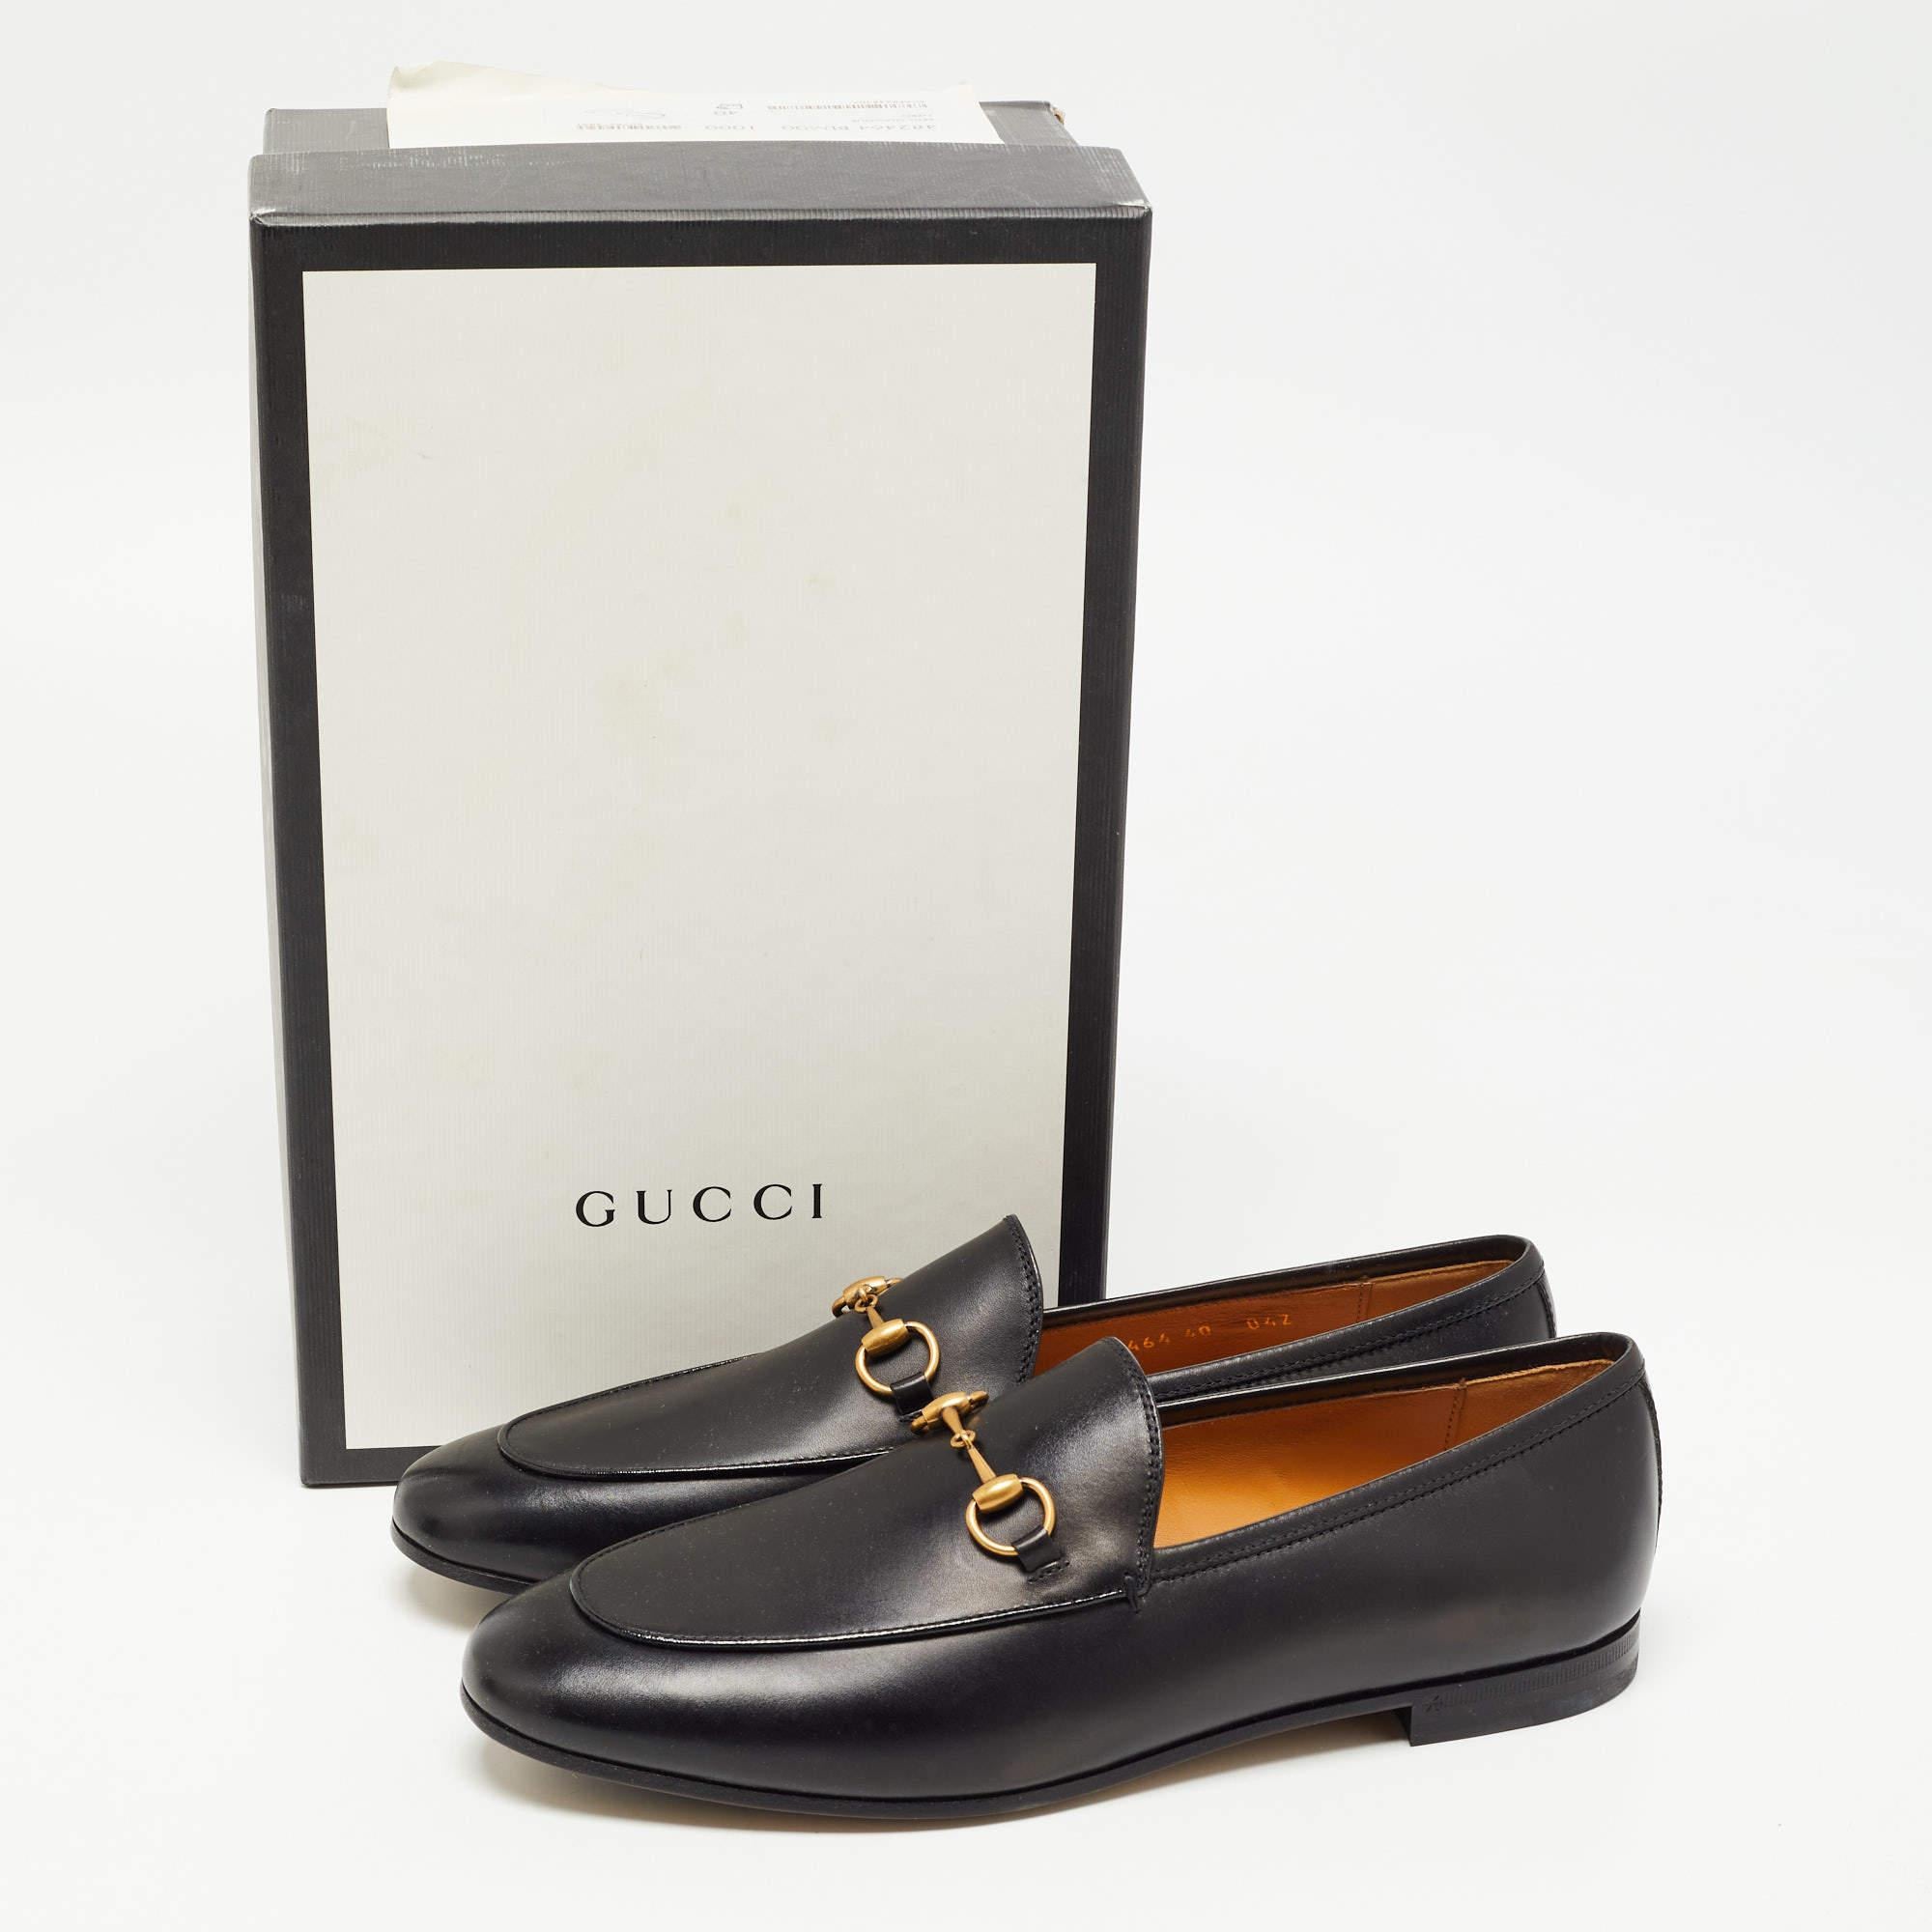 Gucci Black Leather Jordaan Loafers Size 40 2